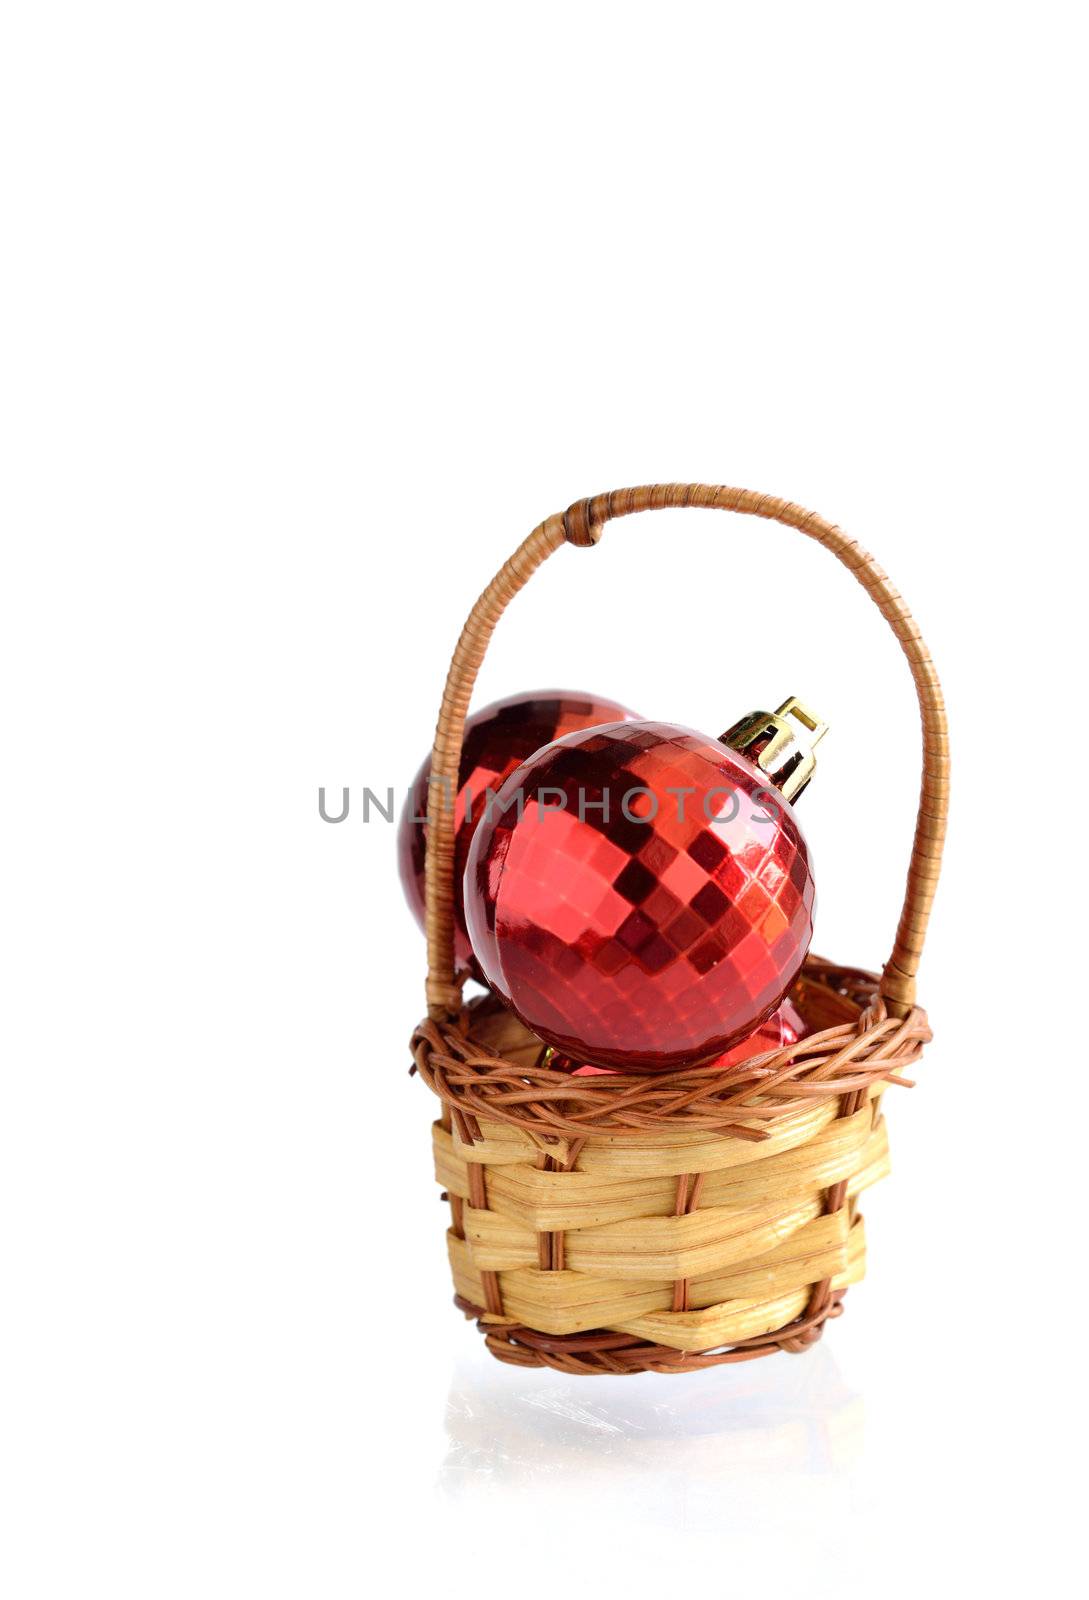 Ball in basket Christmas decorations by Kheat